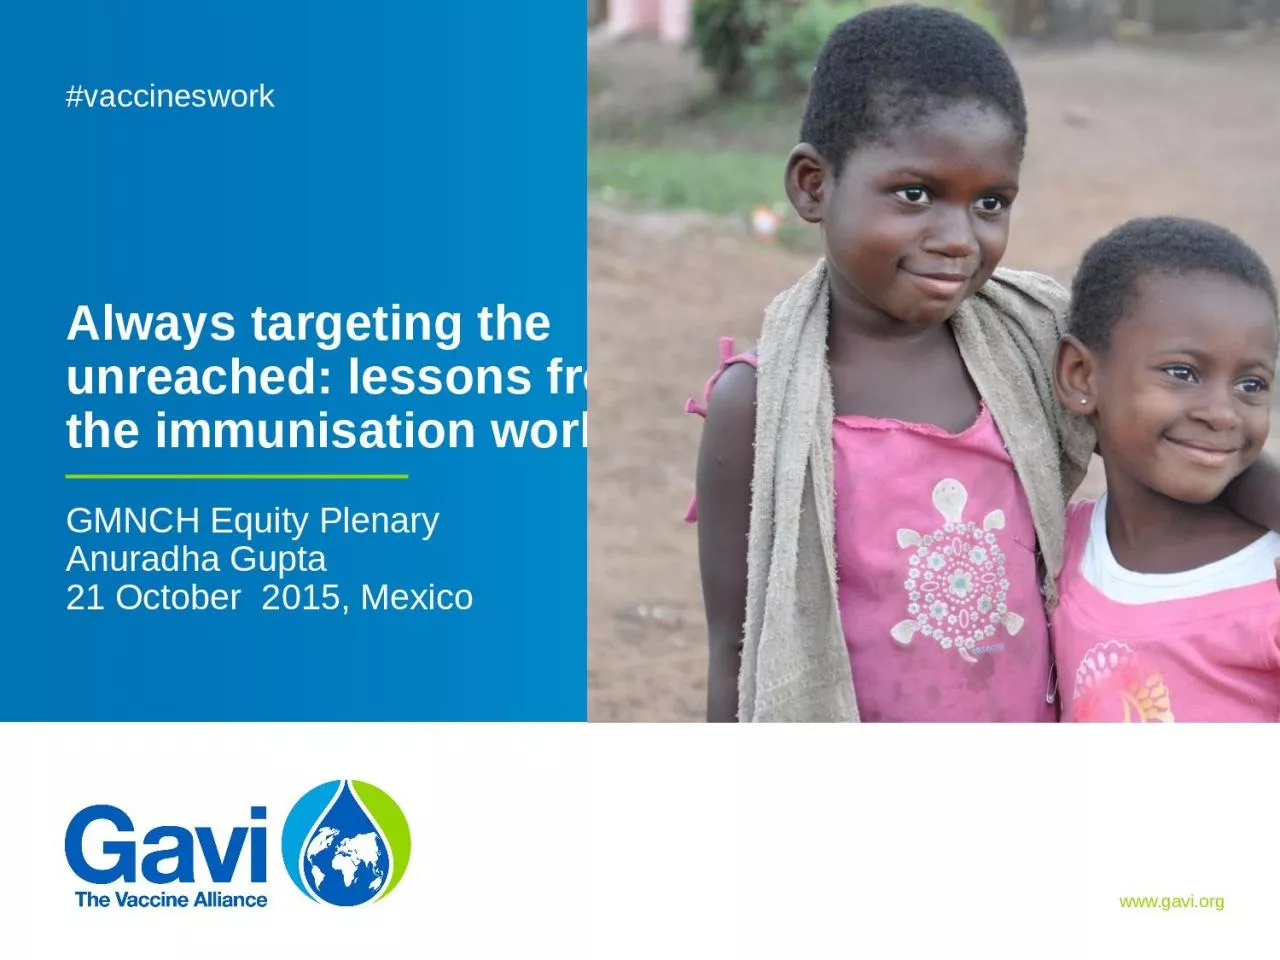 Always targeting the unreached: lessons from the immunisation world